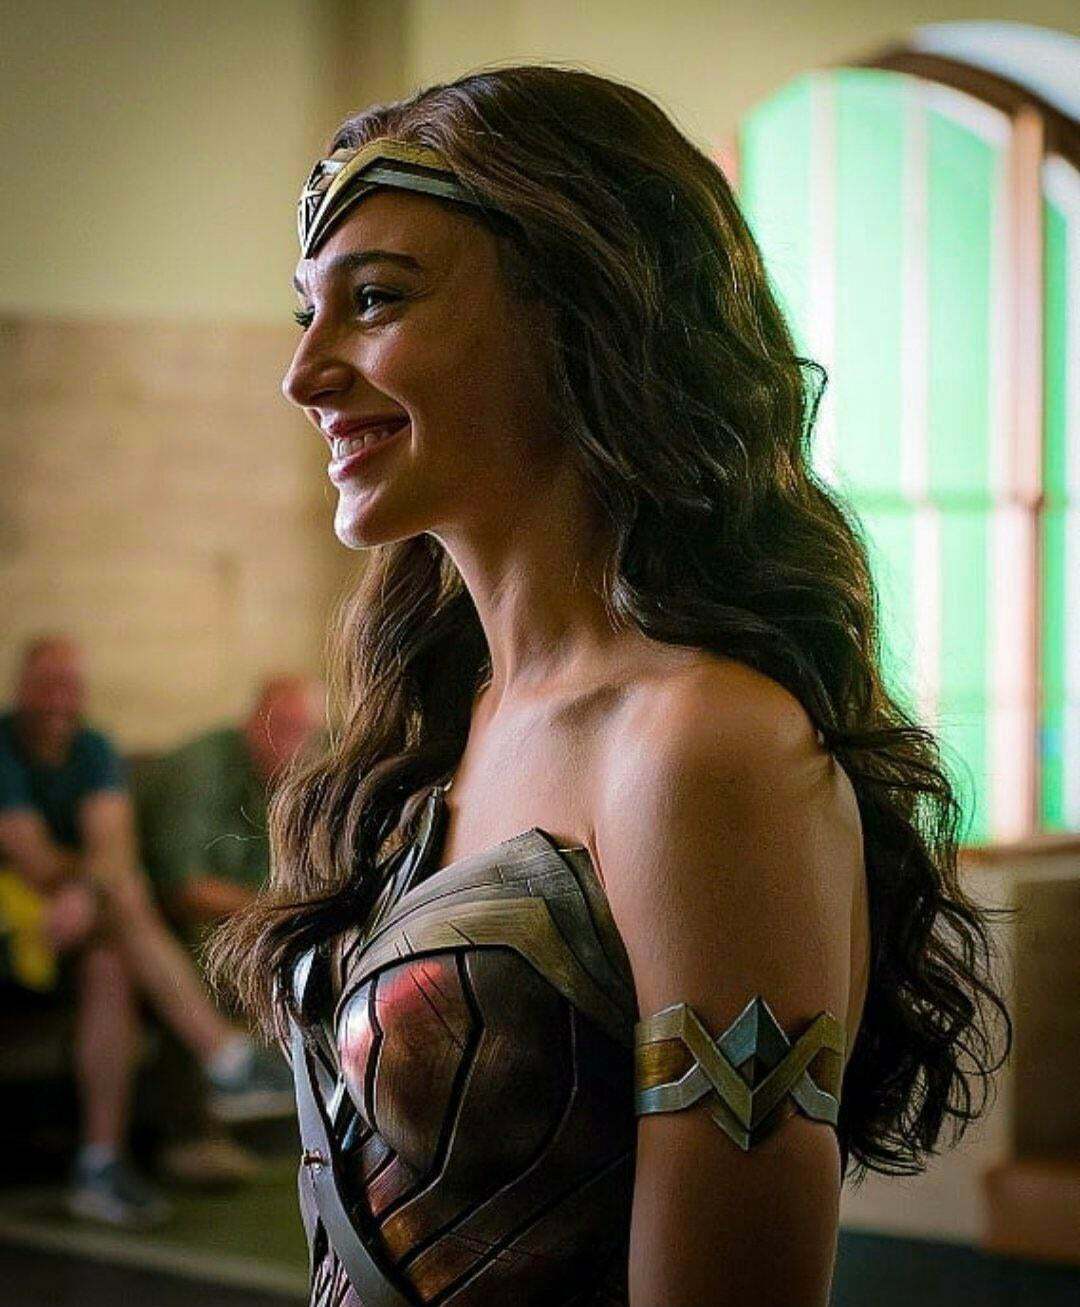 Do you think Gal Gadot’s husband asks her to get into her costume when they fuck ?